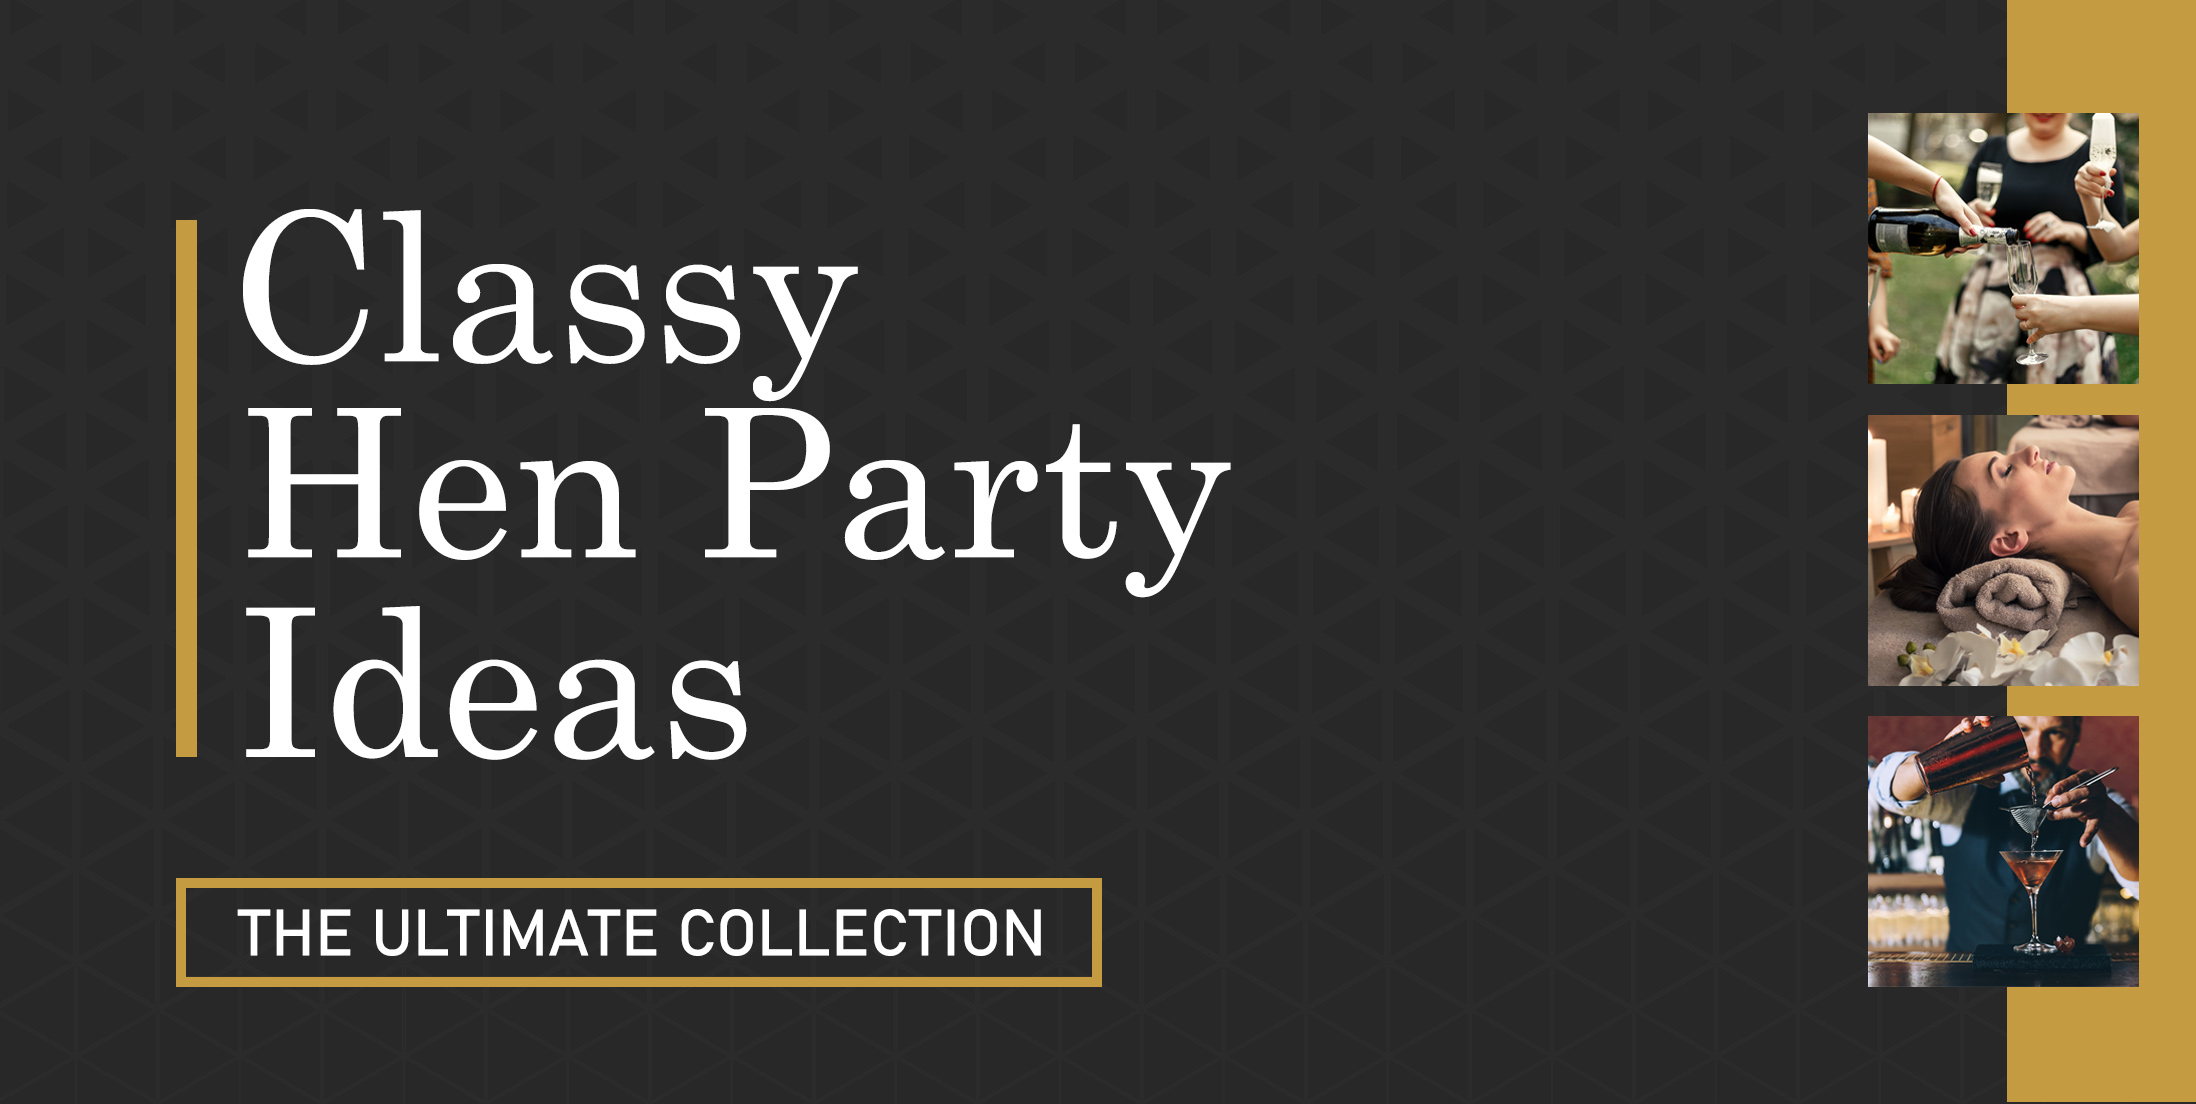 Classy Hen Party Ideas - The Ultimate Collection